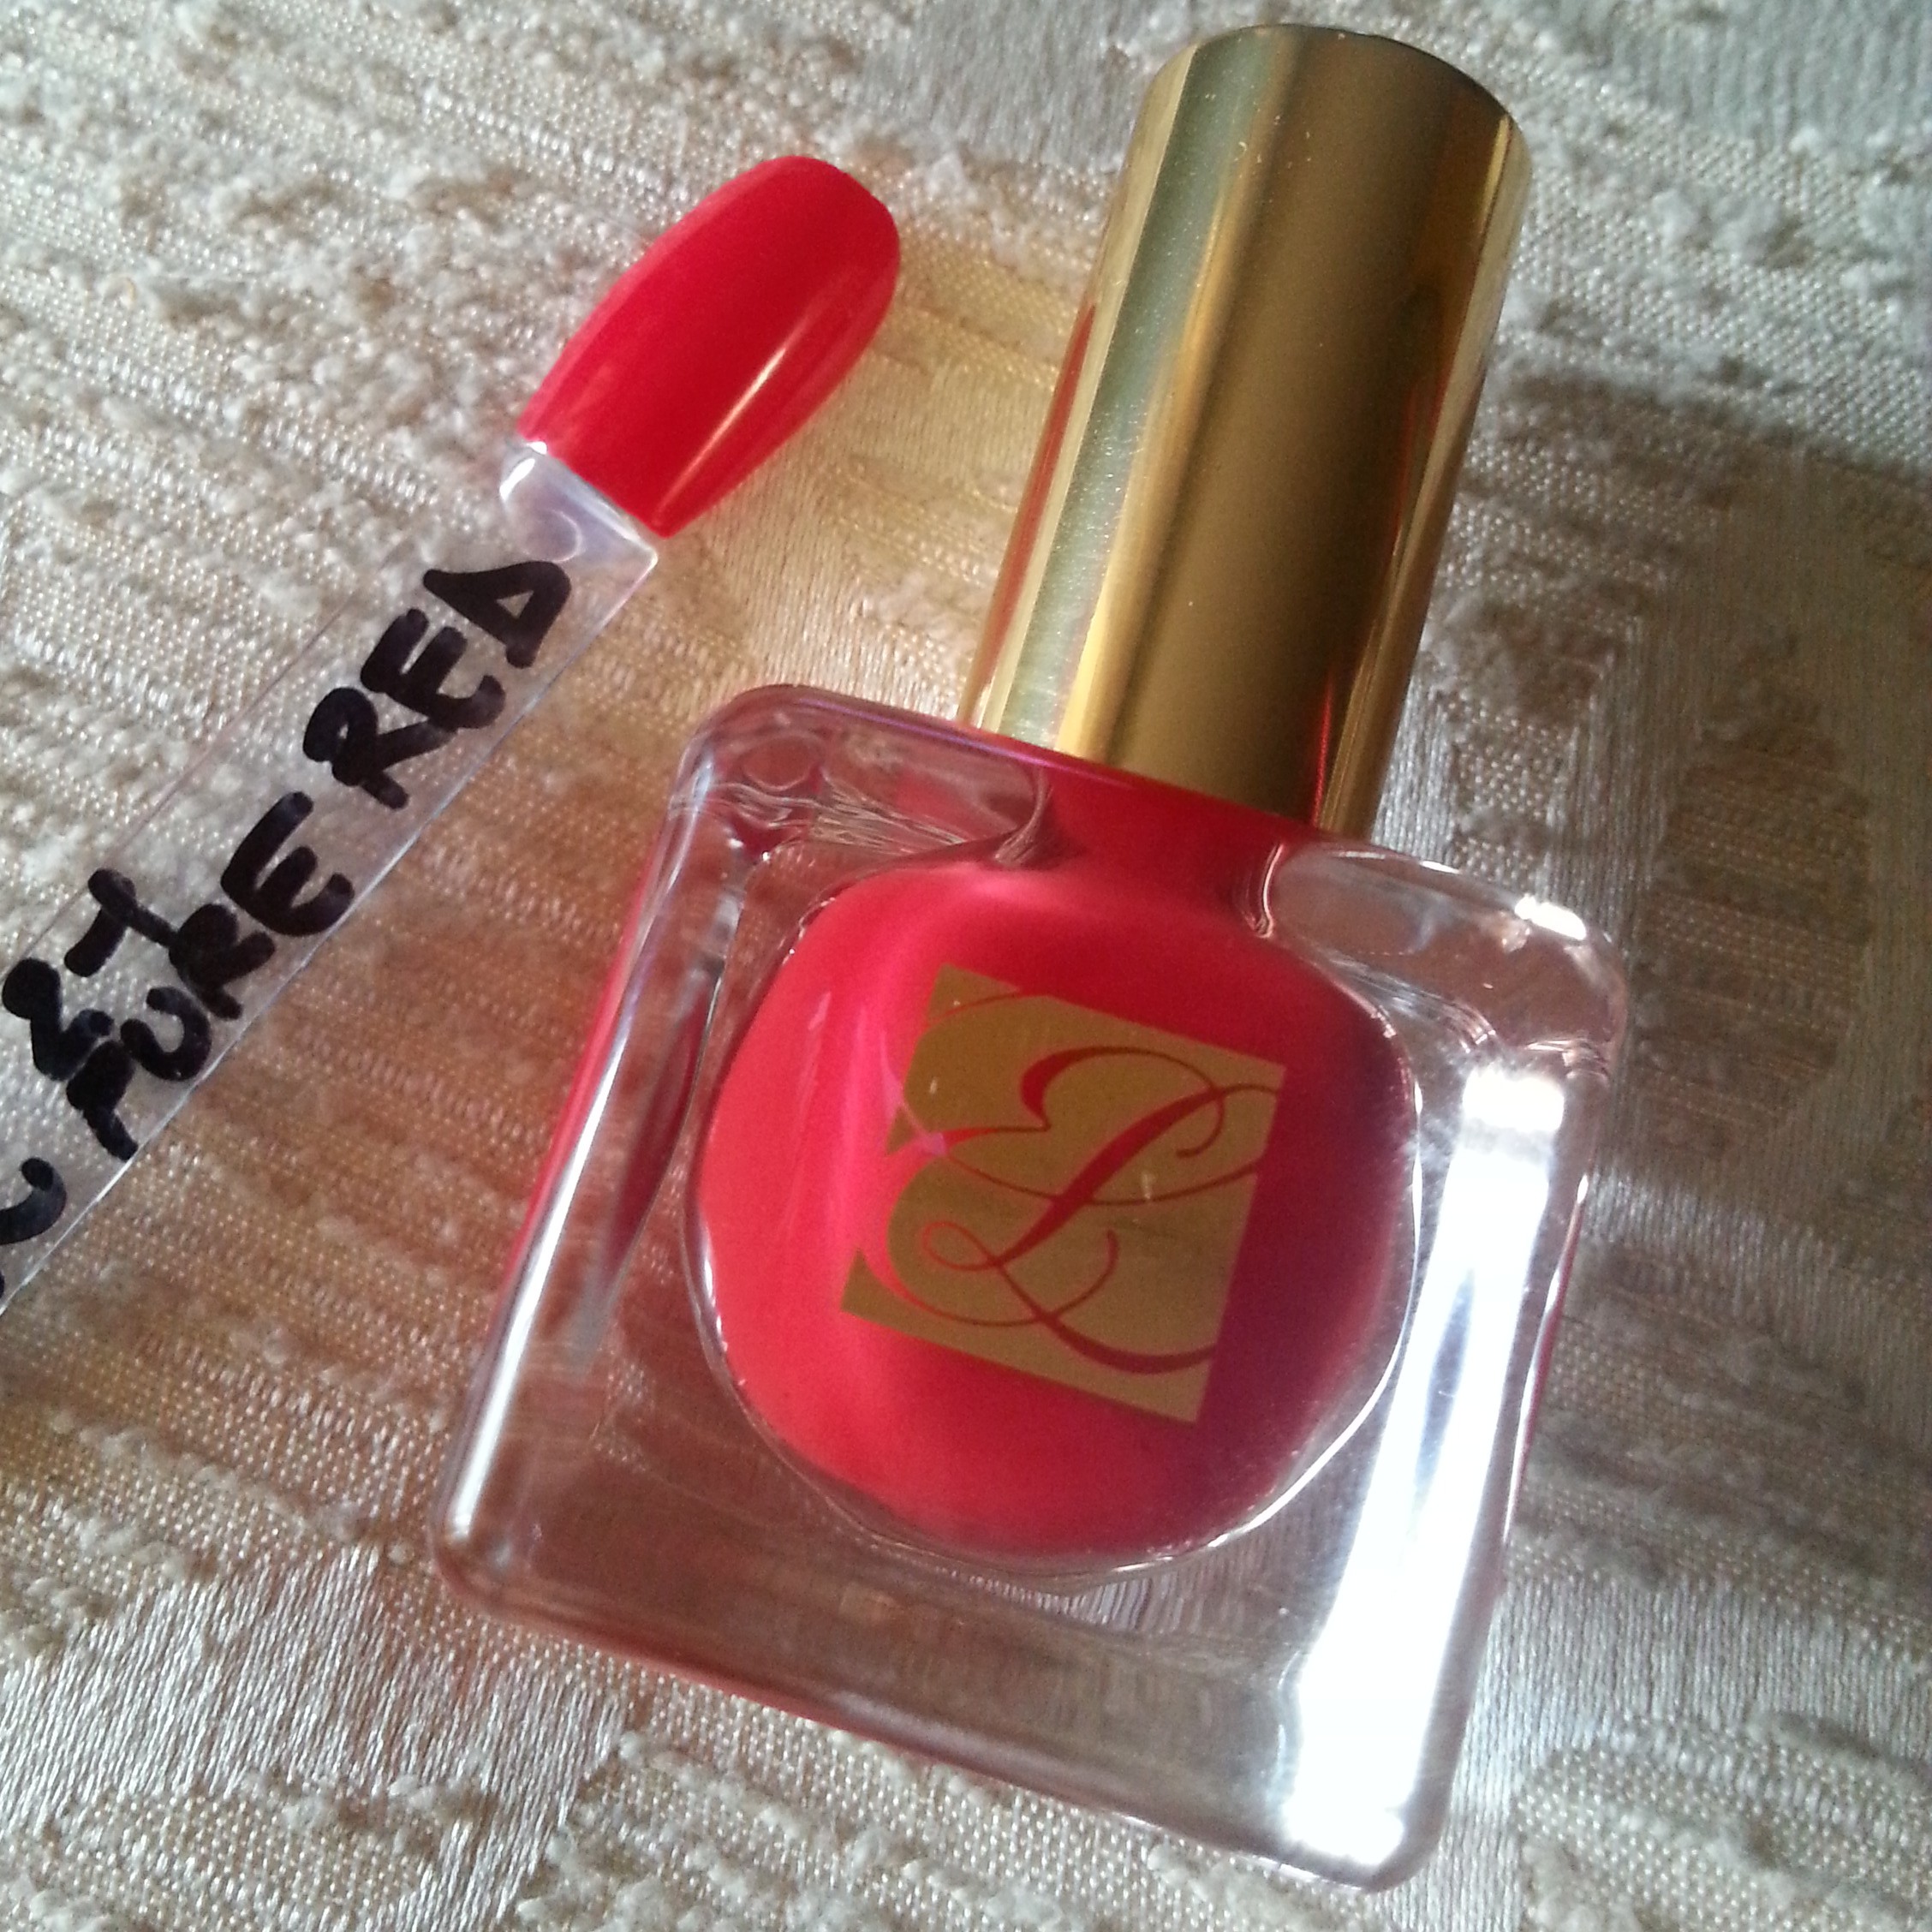 Estee Lauder Pure Color n. 21 - Pure Red